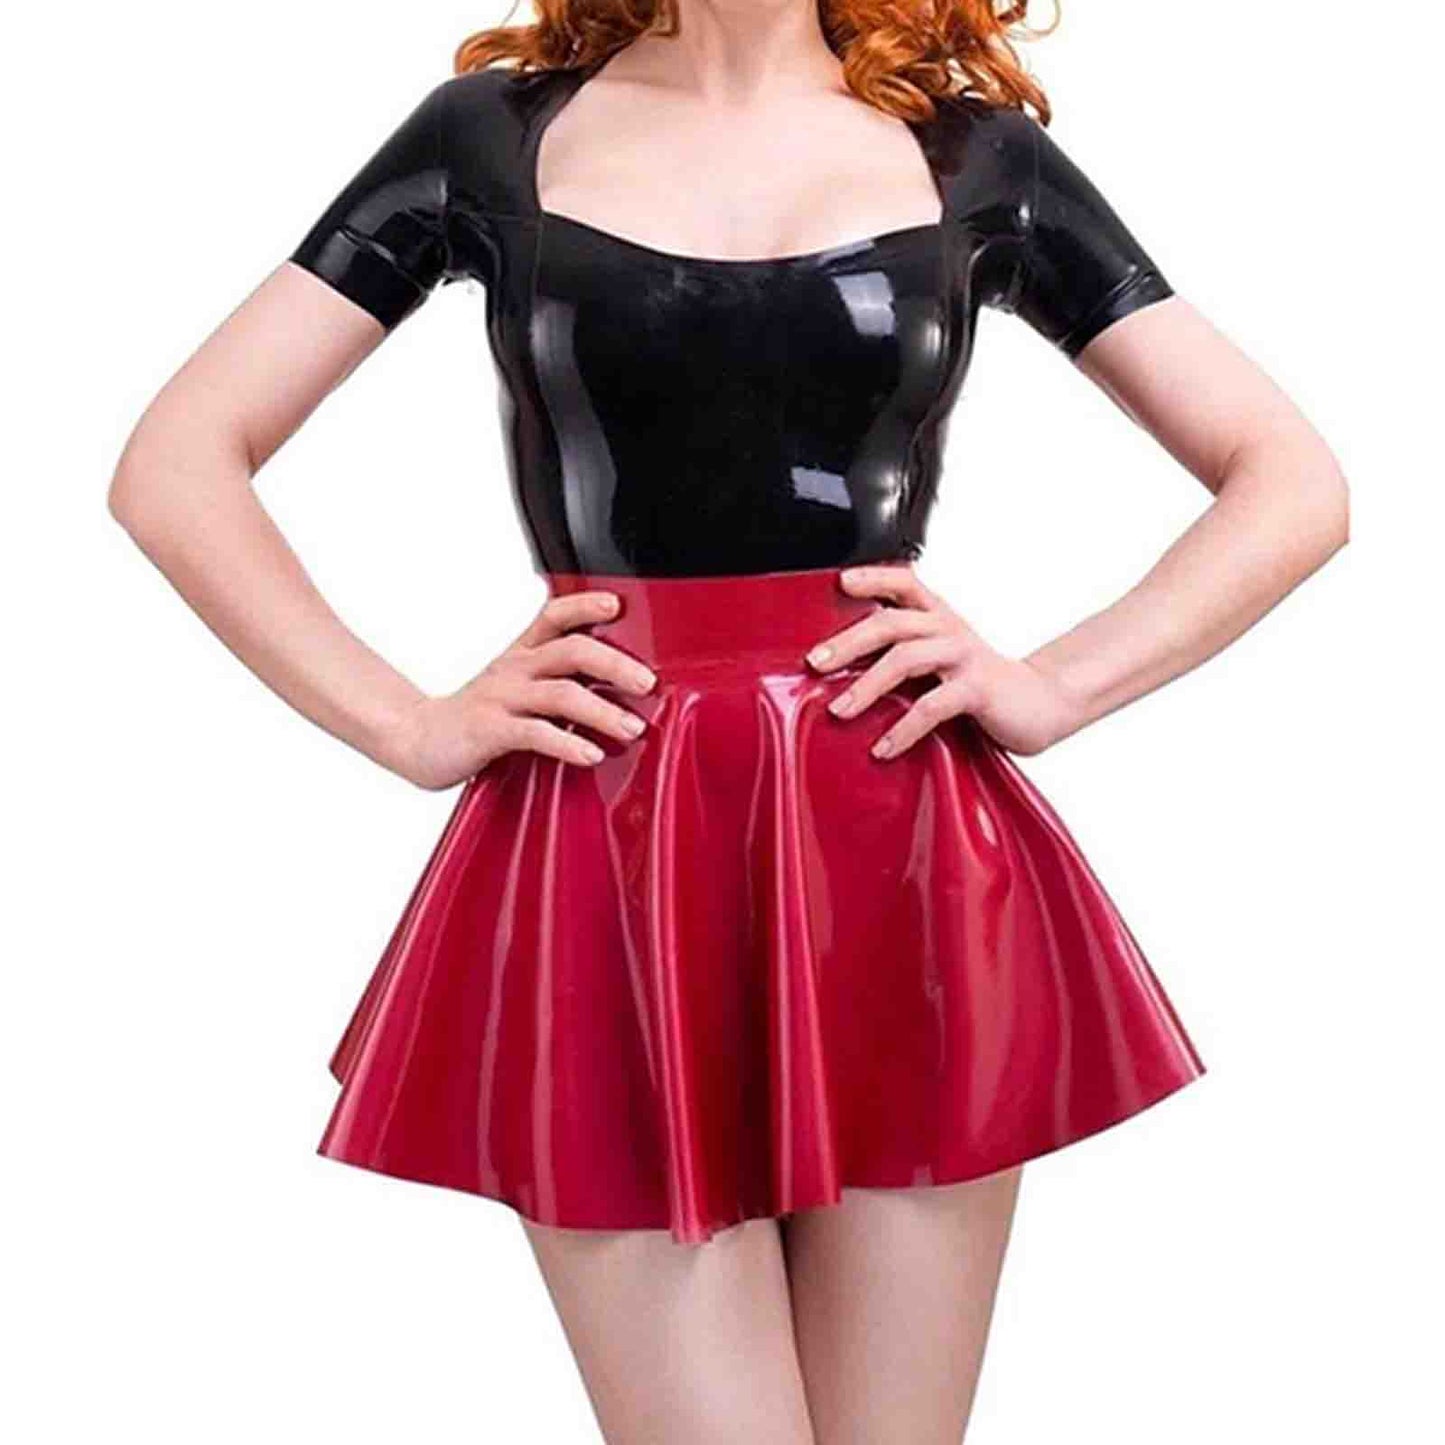 MONNIK Latex ladies Fashion Skirt Sexy A-line Miniskirt Cute Girl Rubber Pleated Skirt for fetish Catsuit party Club wear